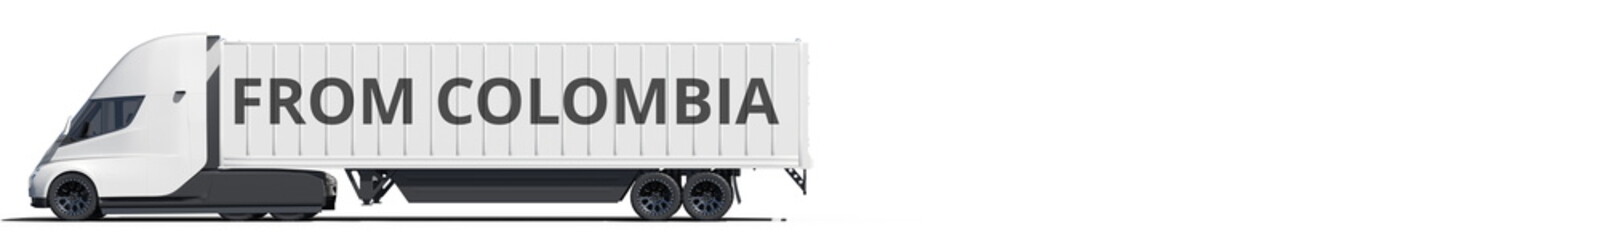 FROM COLOMBIA text on the modern electric truck, 3d rendering